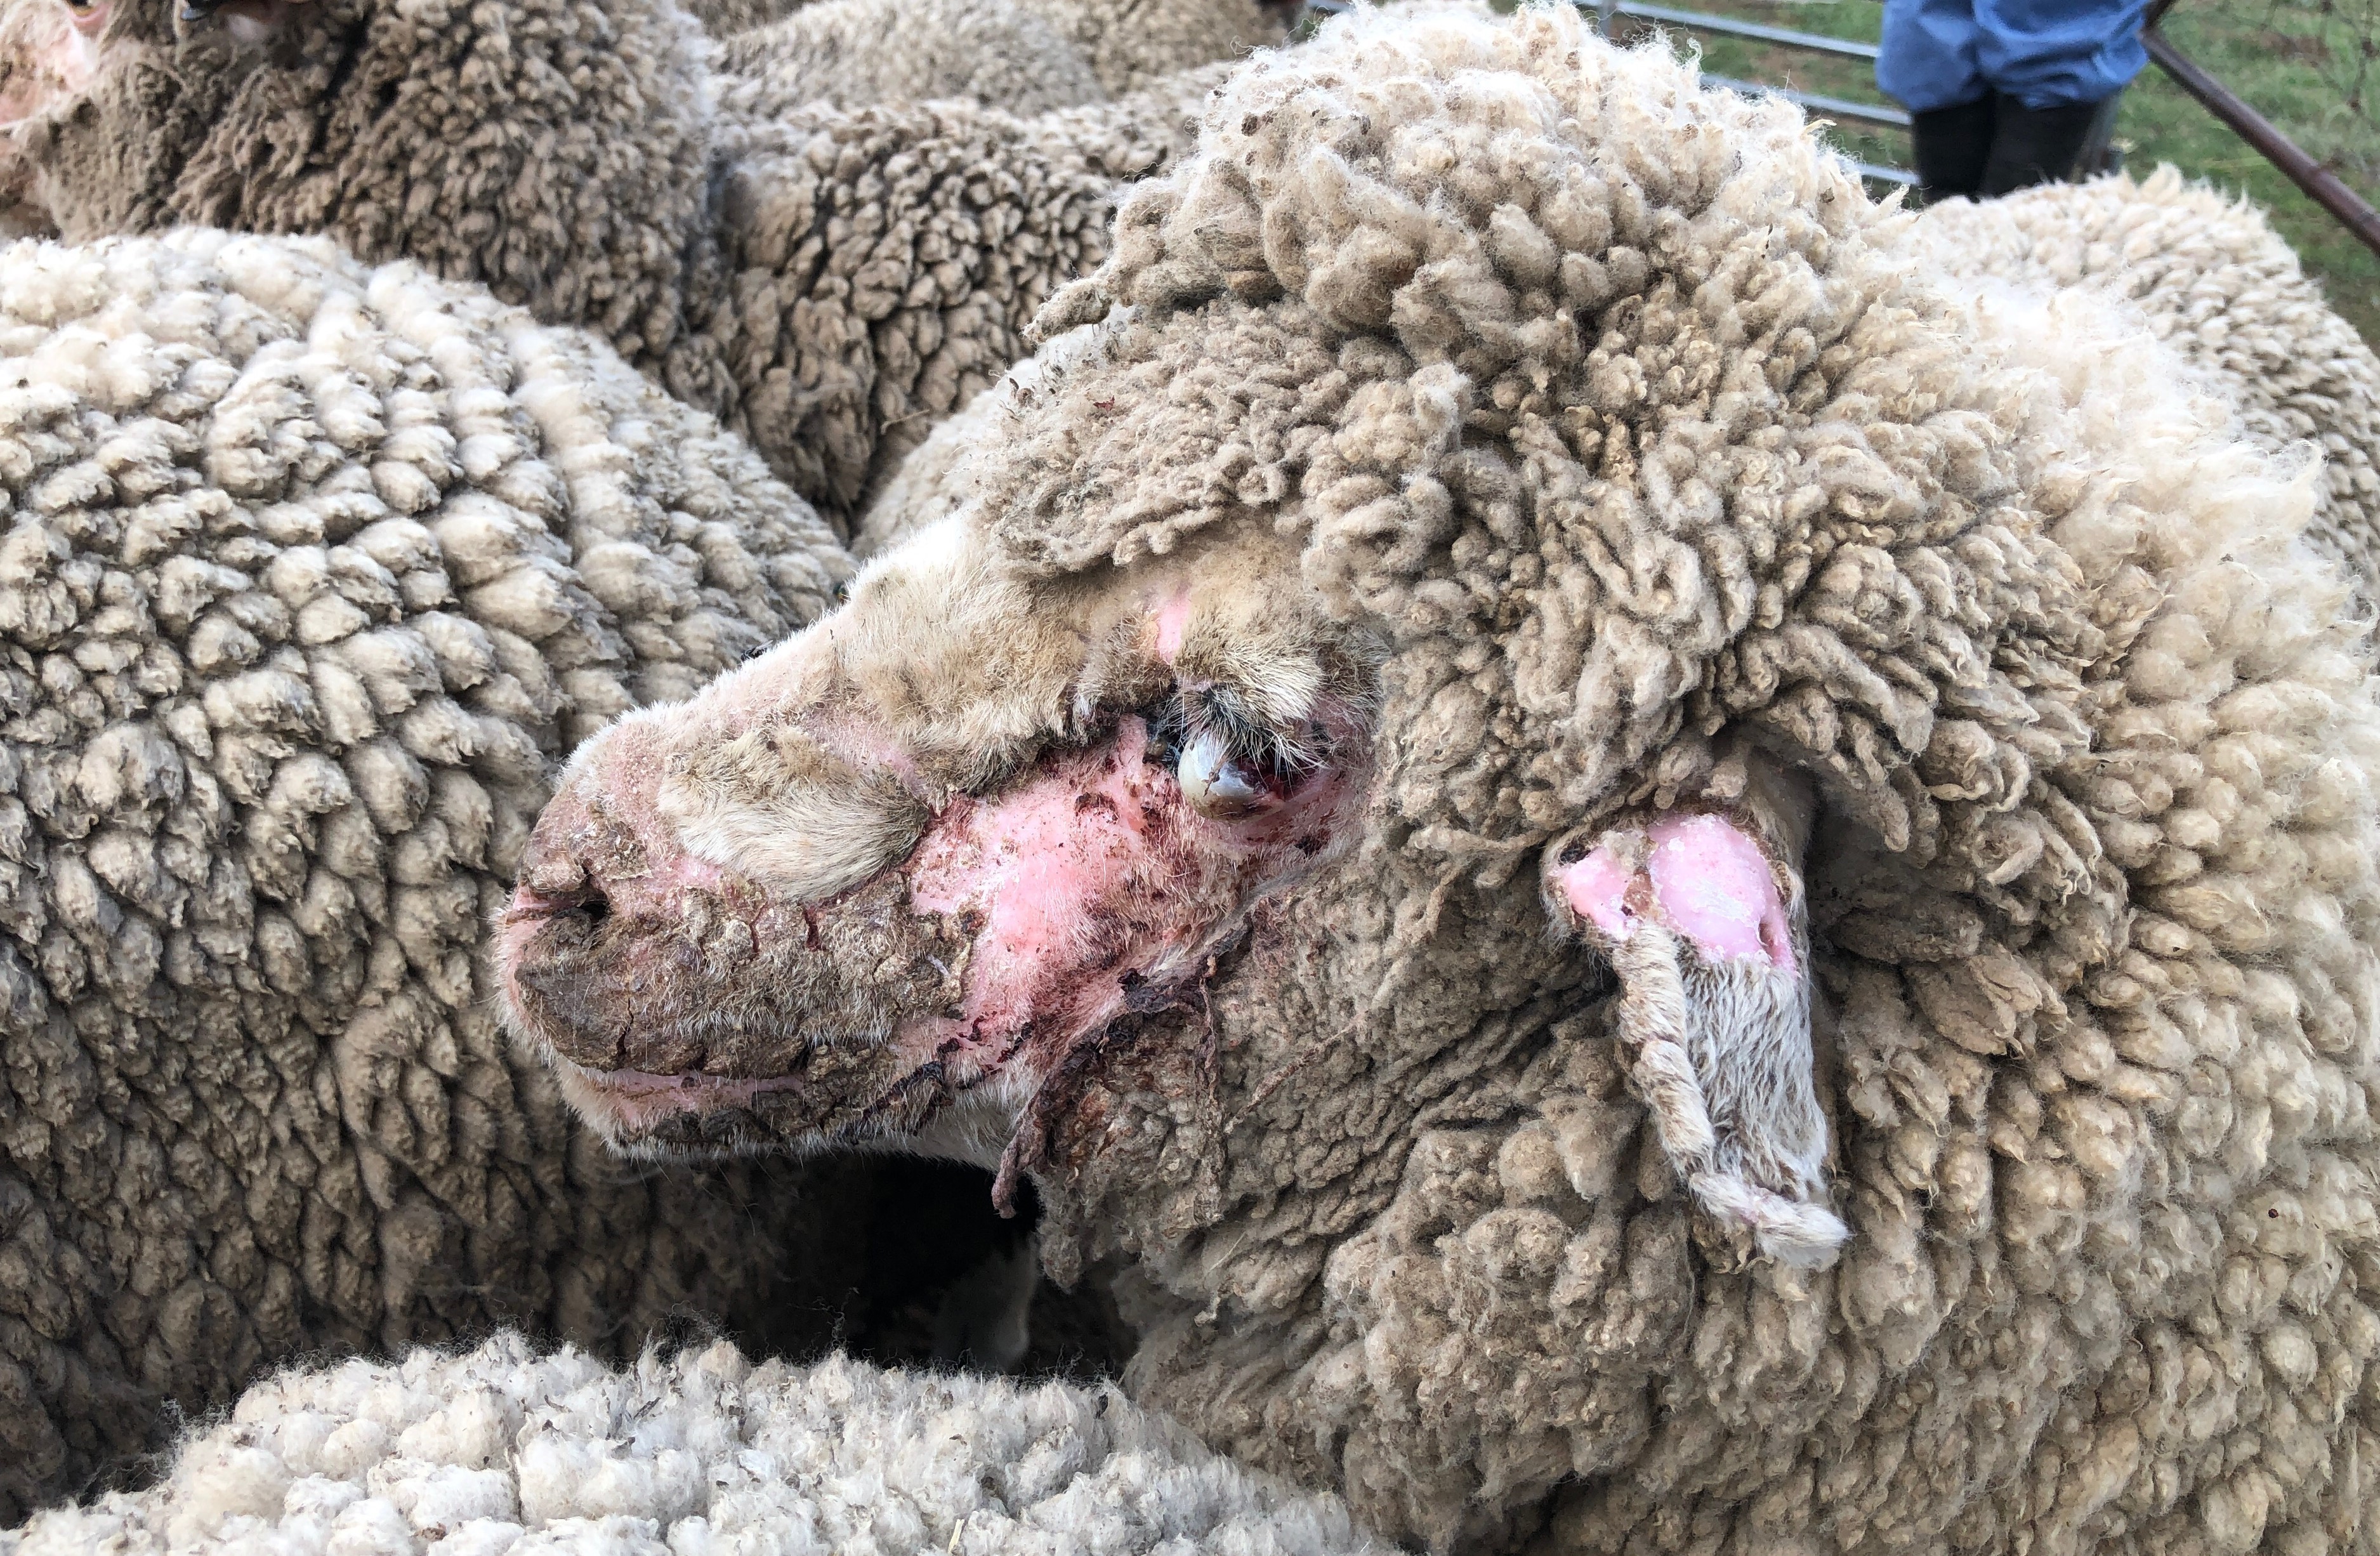 Sheep affected by photosensitisation on the face and ears